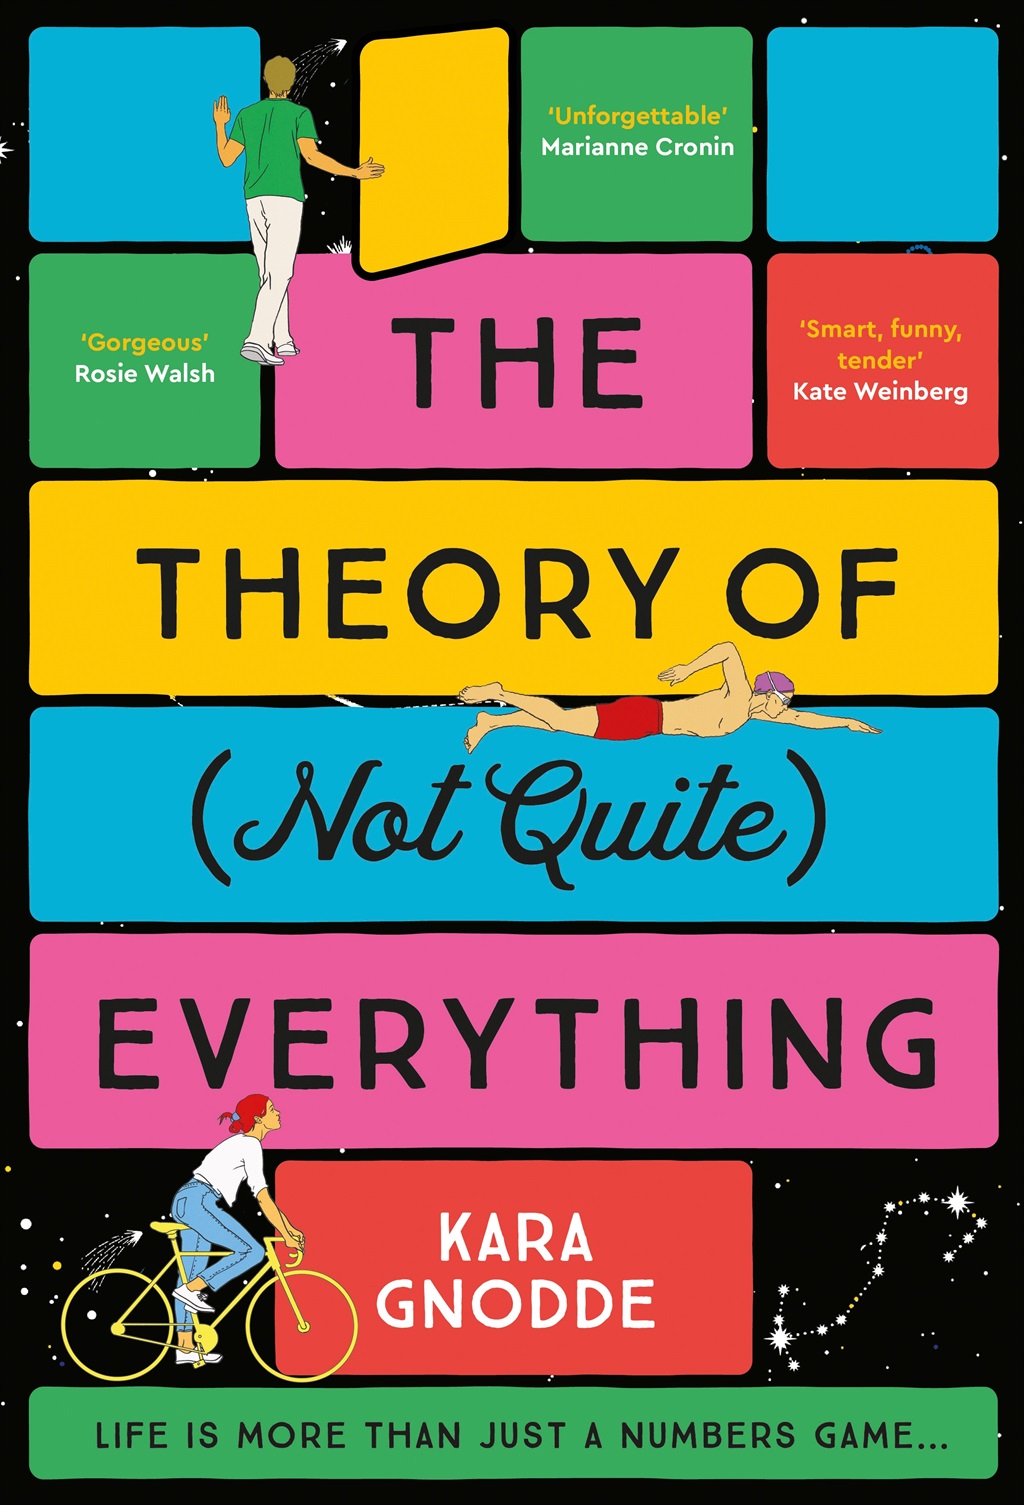 The Theory of (Not Quite) Everything by Kara Gnodde.